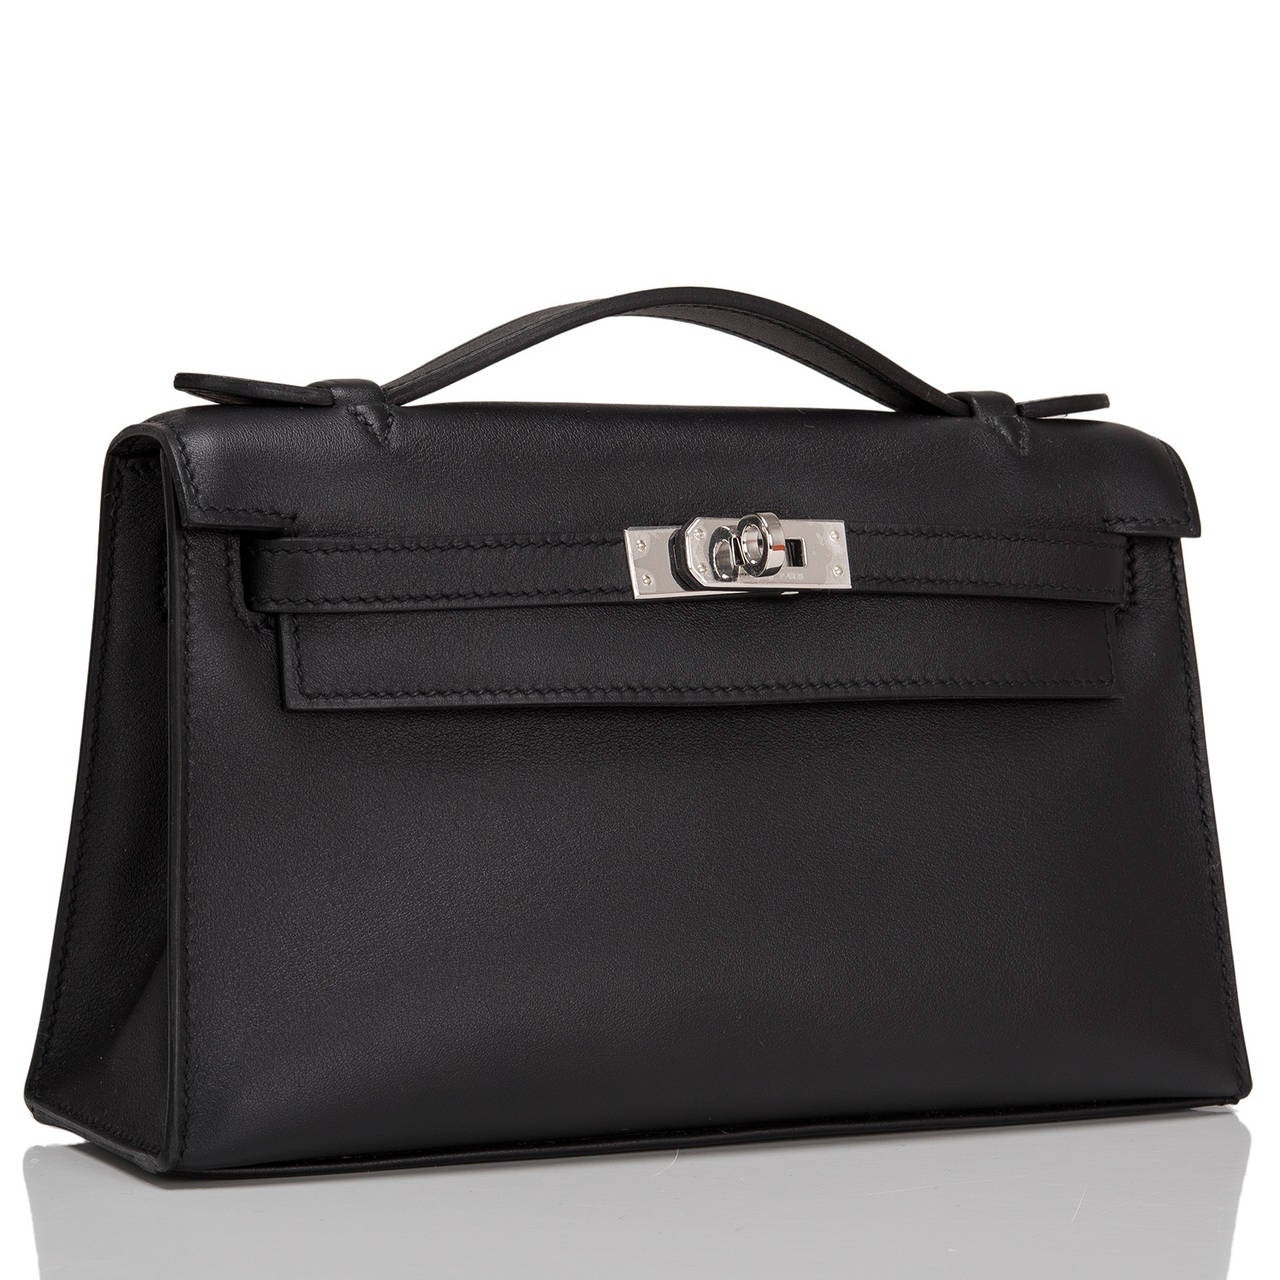 Hermes black swift leather Kelly Pochette clutch with palladium hardware.

This swift leather Kelly Pochette features tonal stitching, a front flap with two straps, toggle closure and single flat handle. The interior is lined in black chevre and